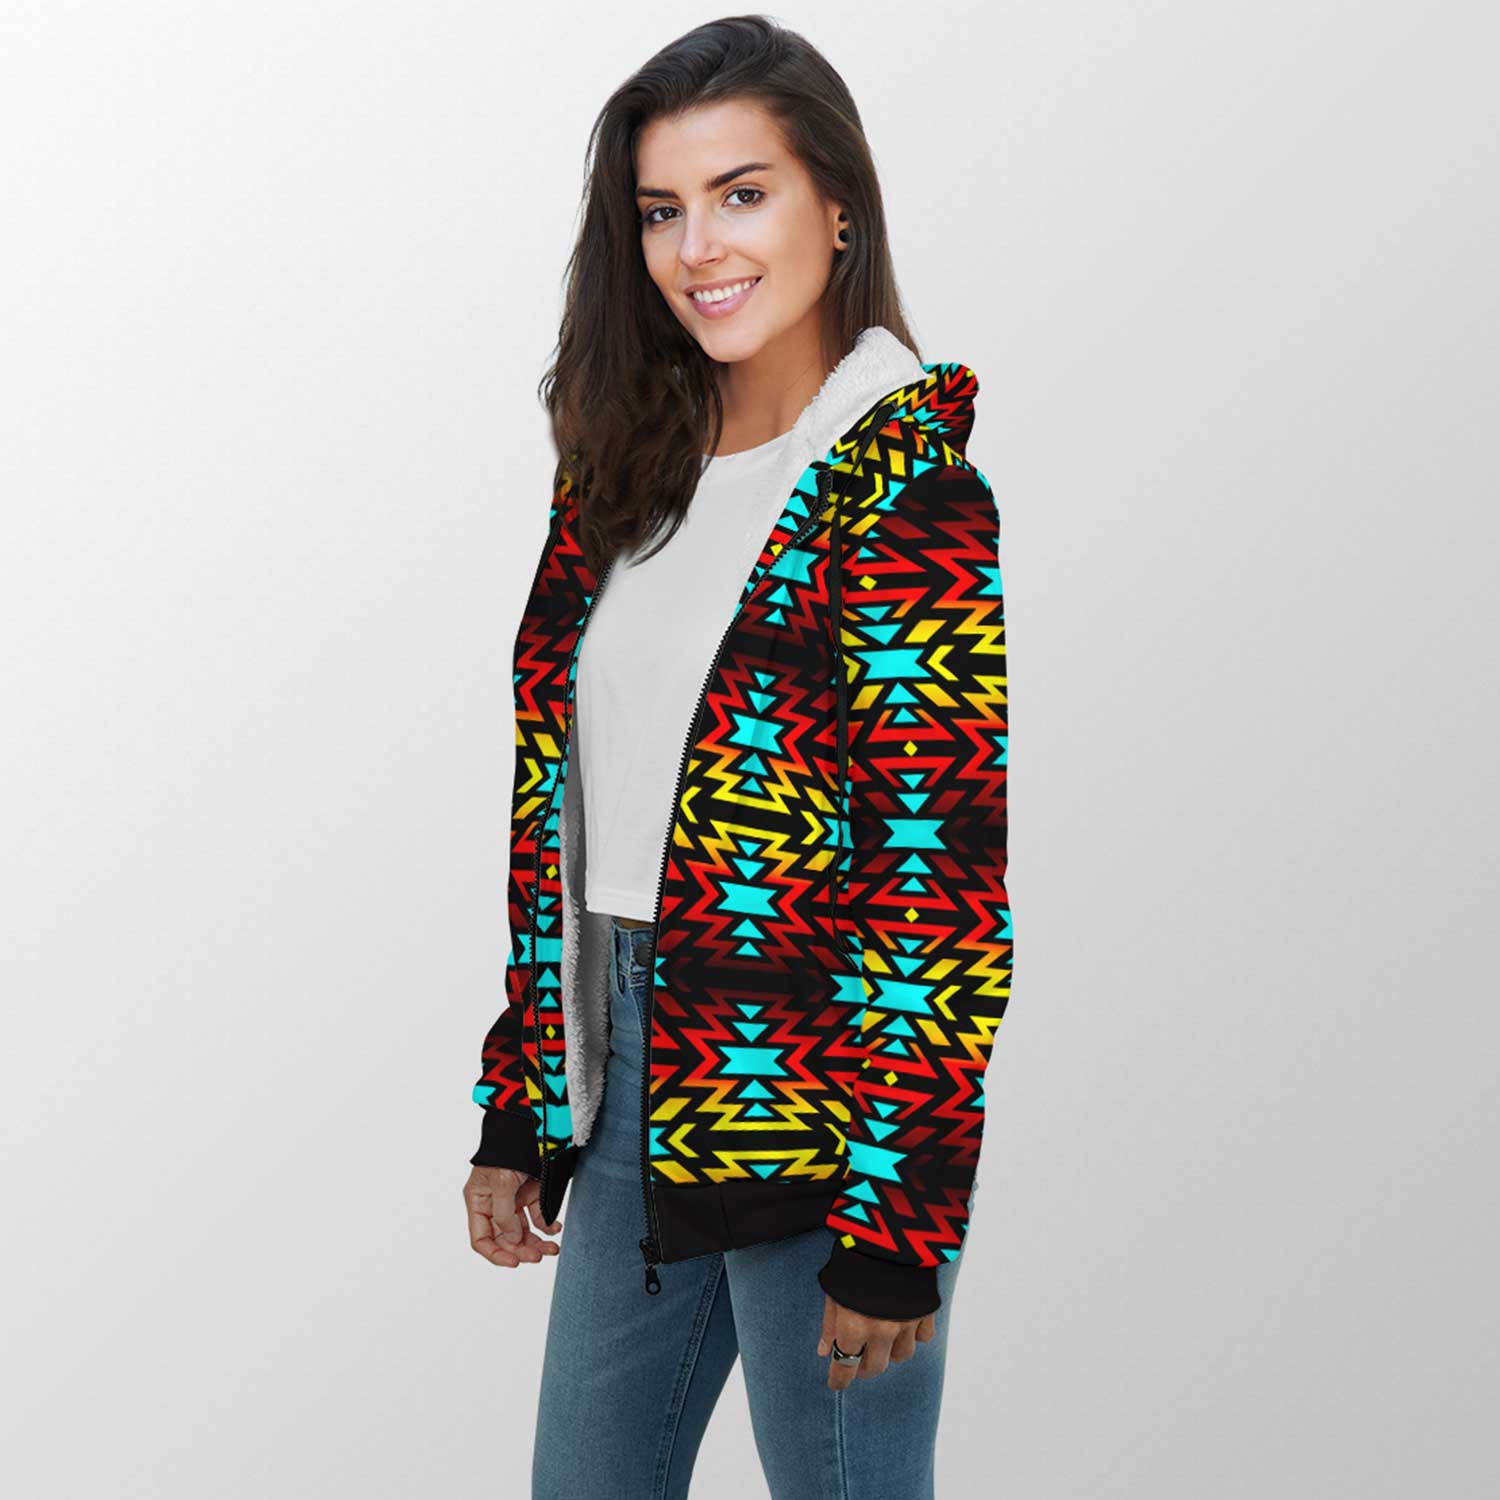 Fire Colors and Turquoise Bearpaw Sherpa Hoodie 49 Dzine 